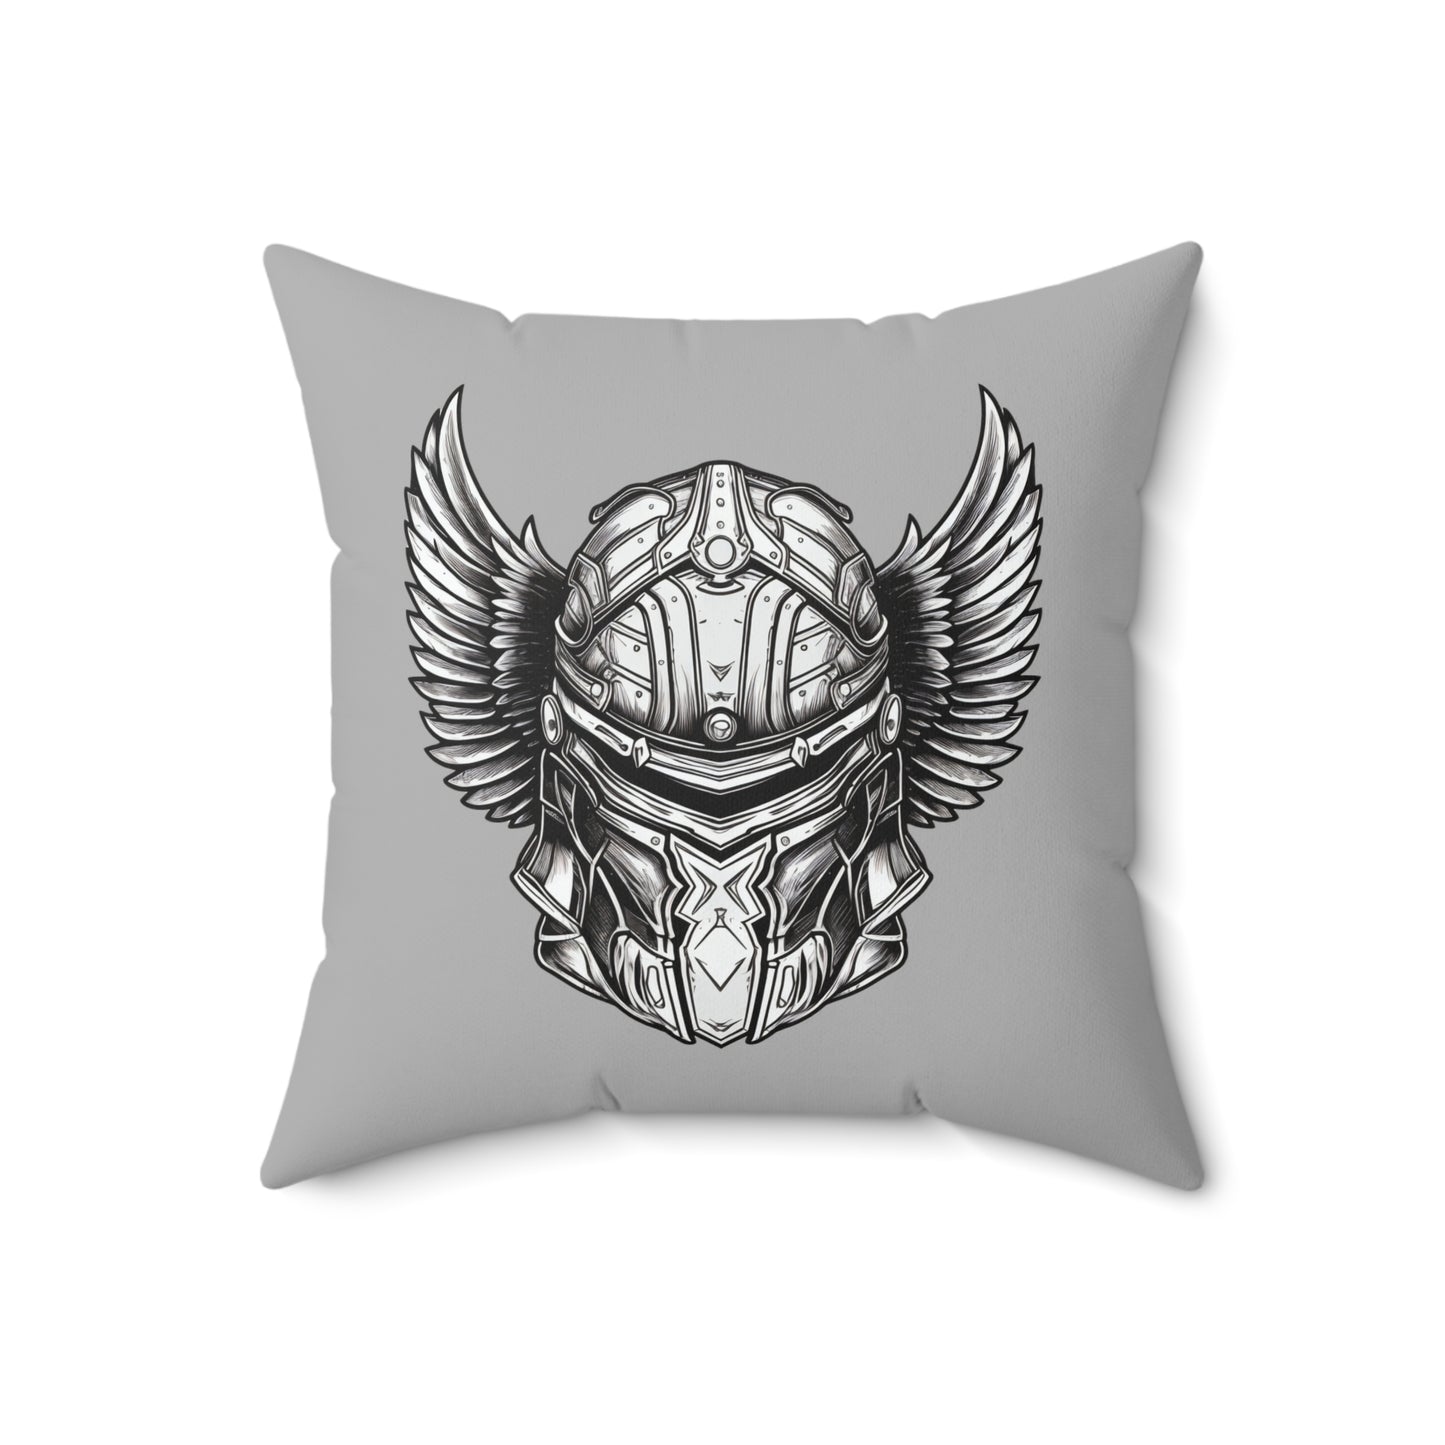 Winged Paladin Helmet Throw Pillow, DnD Pillow, D&D Square Gamer Cushion, Double Sided Gray Accent Pillow, Concealed Zipper